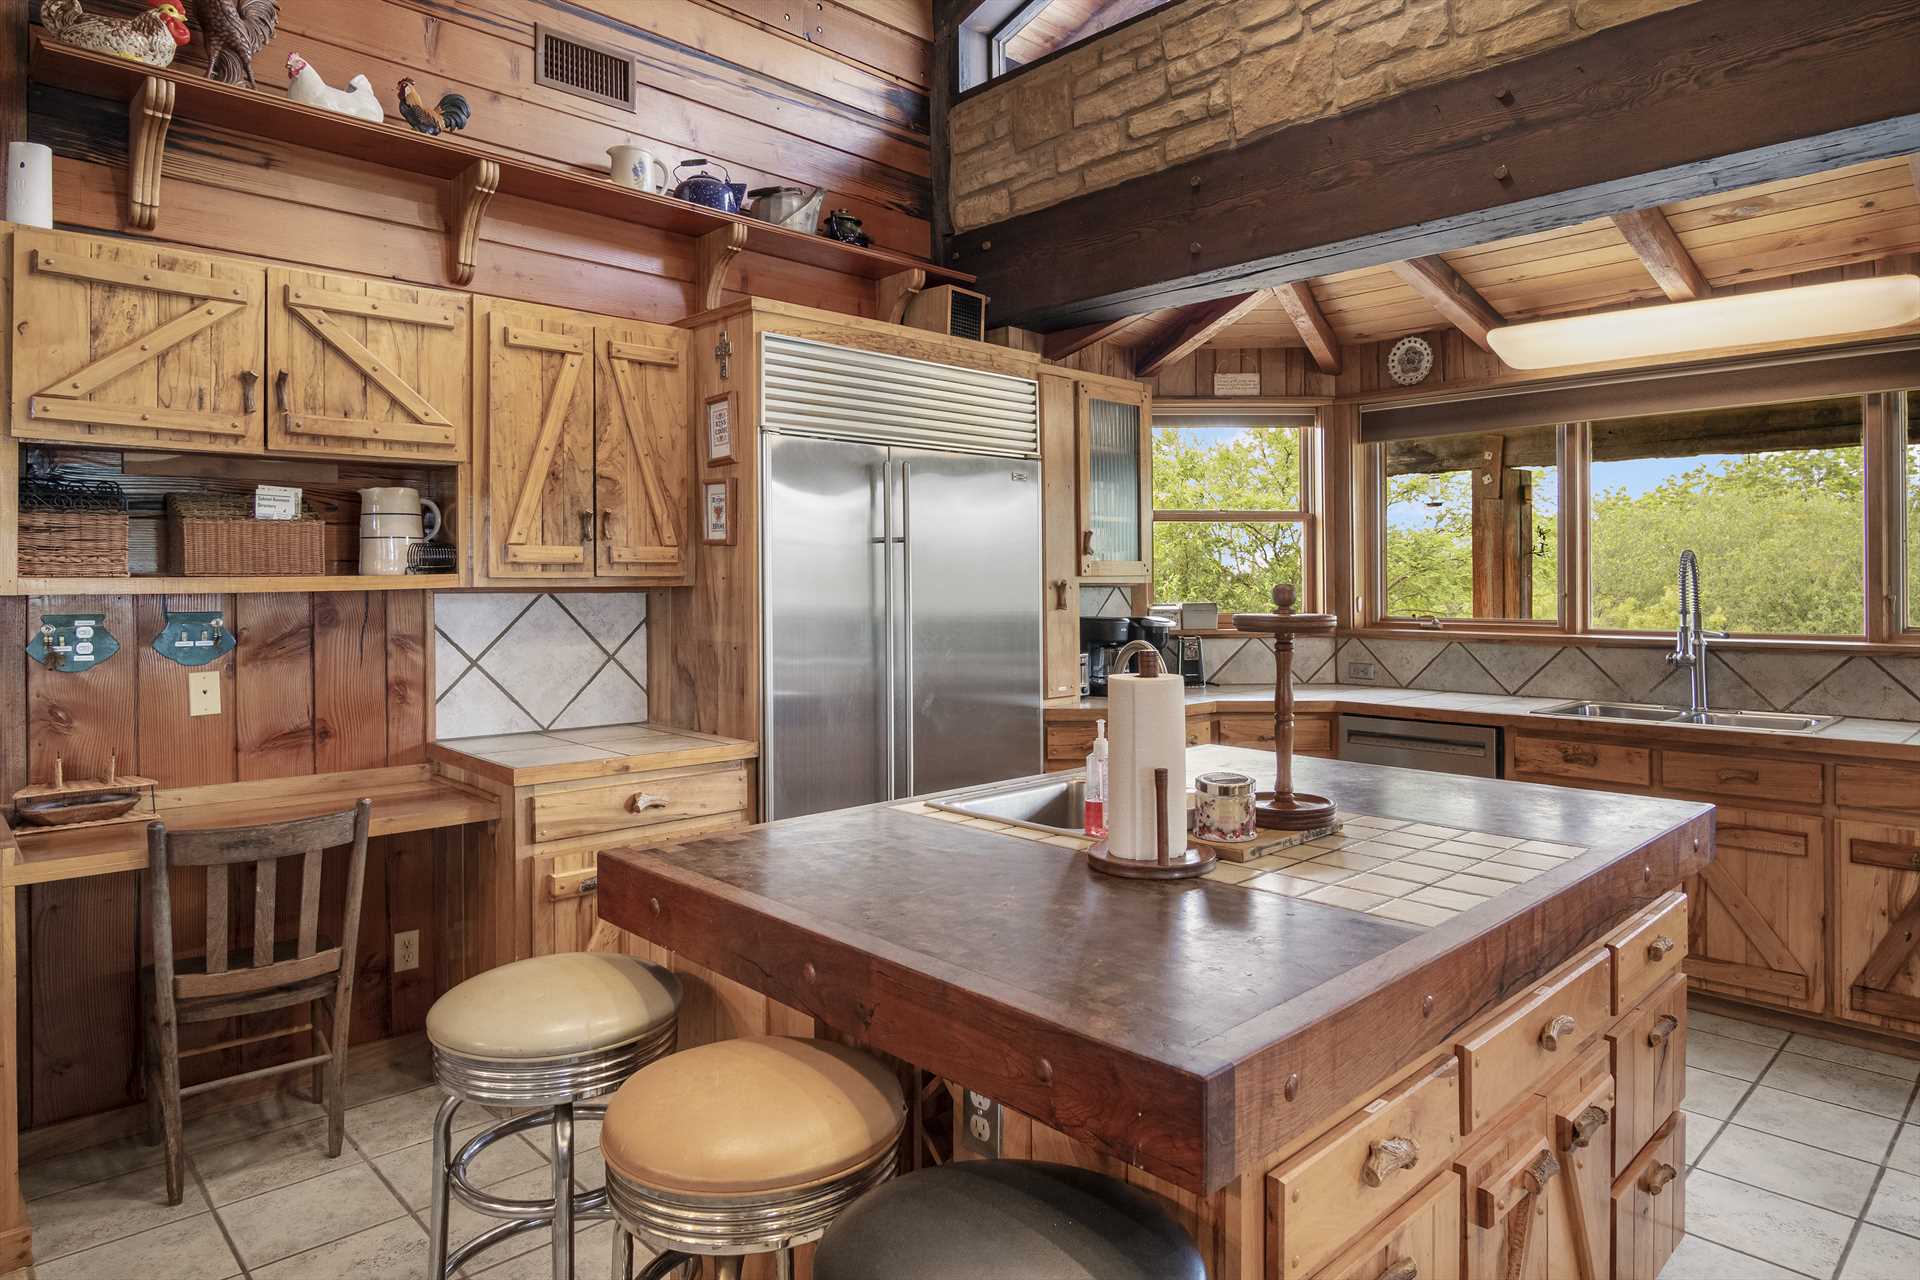                                                 Shiny appliances stand alongside the rustic woodwork, and your kitchen here includes extras like a bread warmer and ice machine!